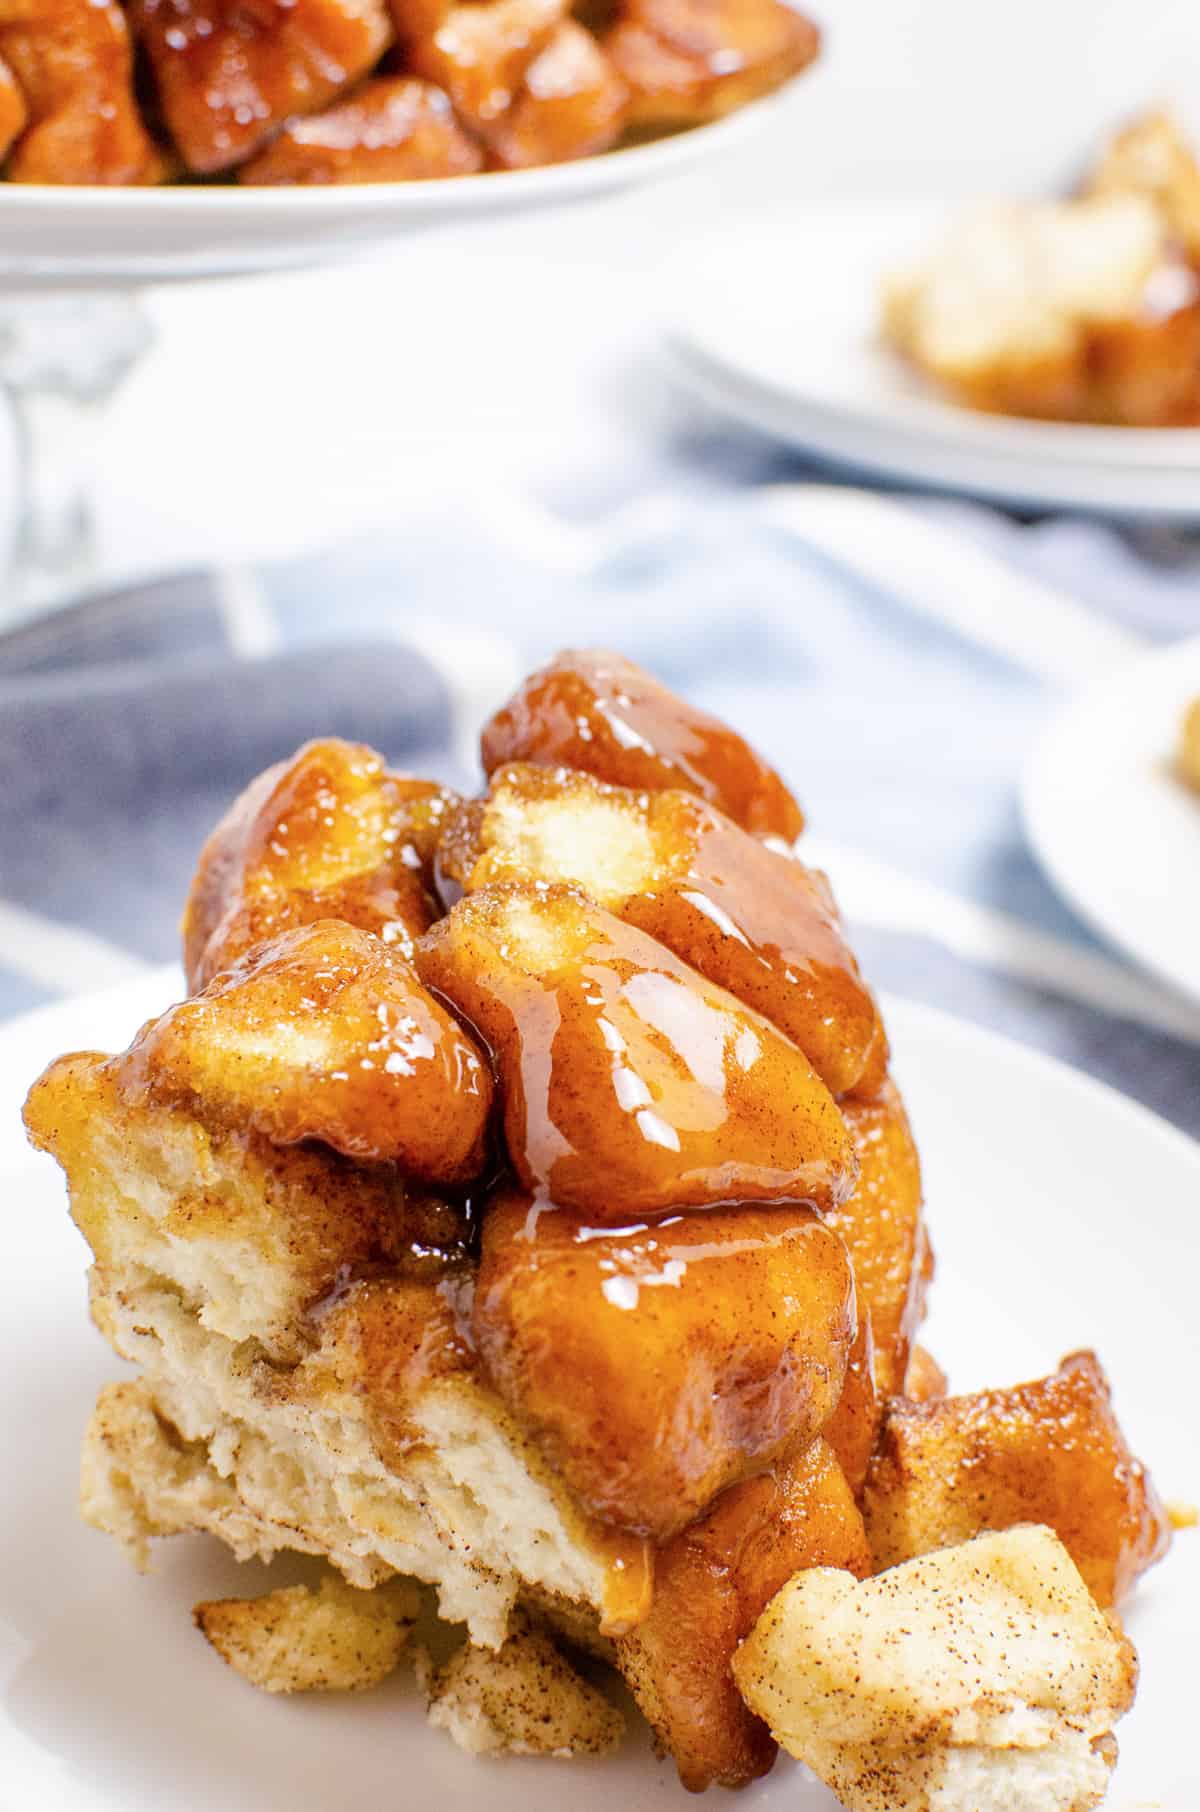 Chunk of monkey bread on white plate.